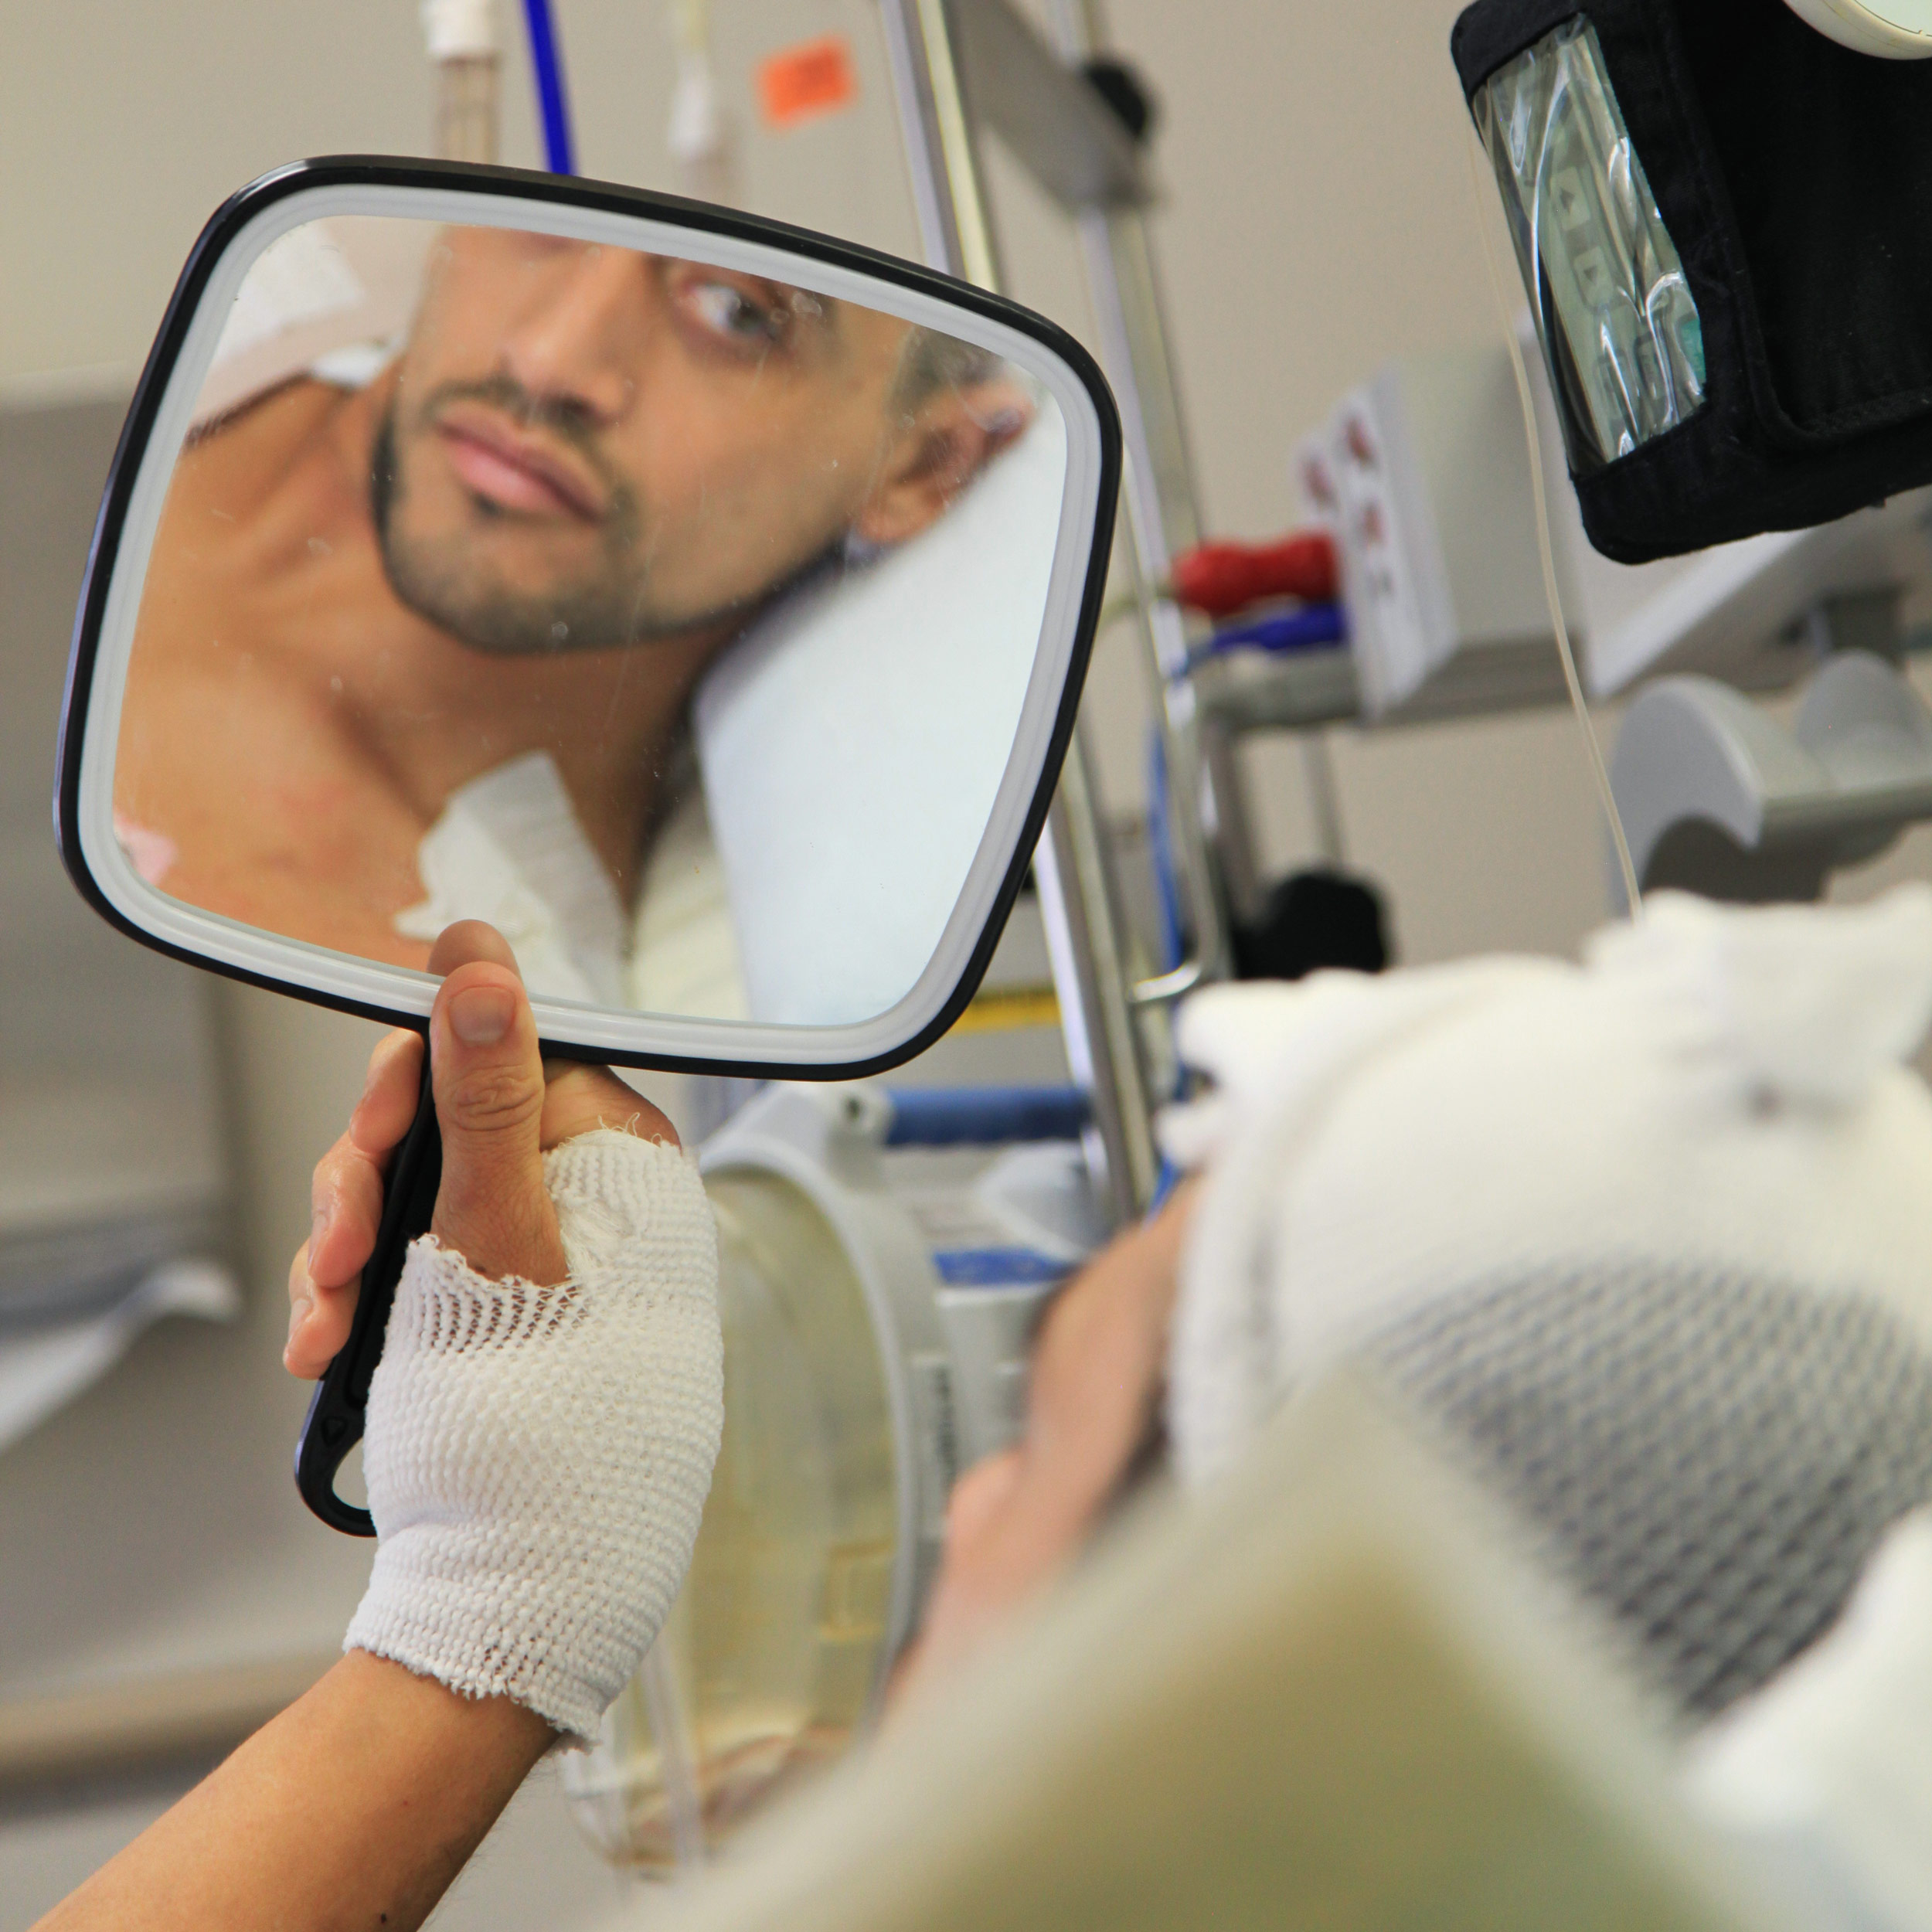 Self-reflection in the hospital where Eduardo recovered from an electrocution accident